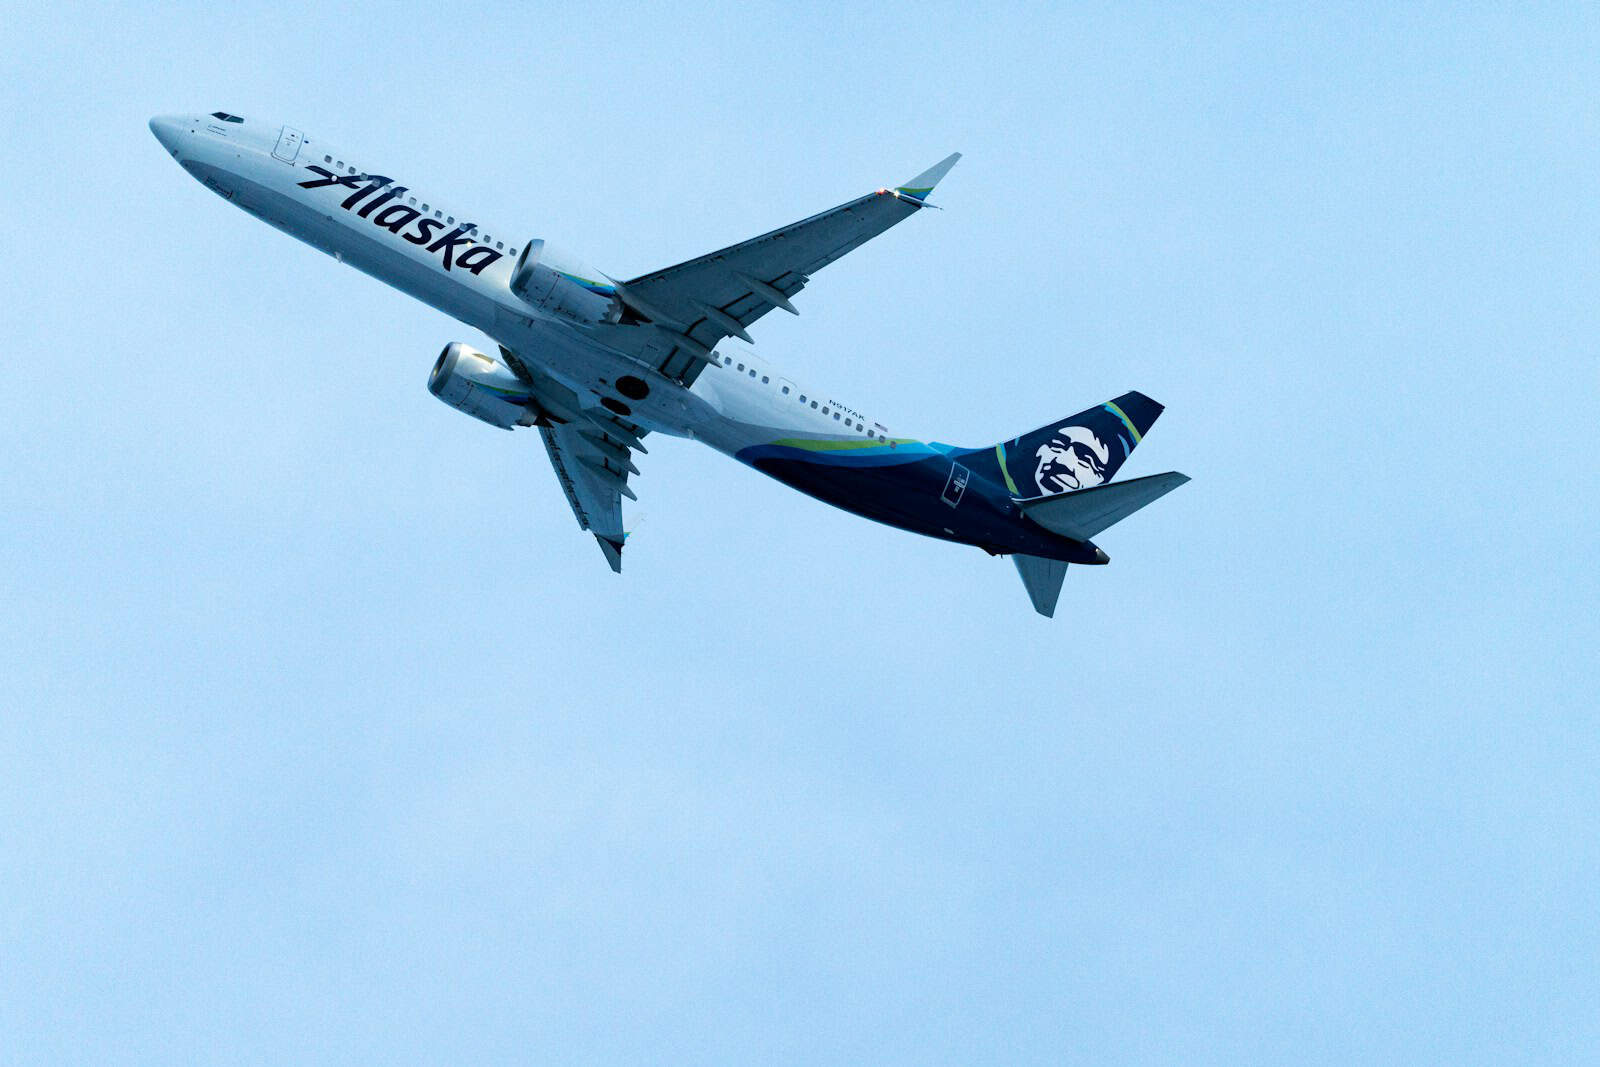 Alaska Airlines Resumes Flights After Ground Stop – RetailWire